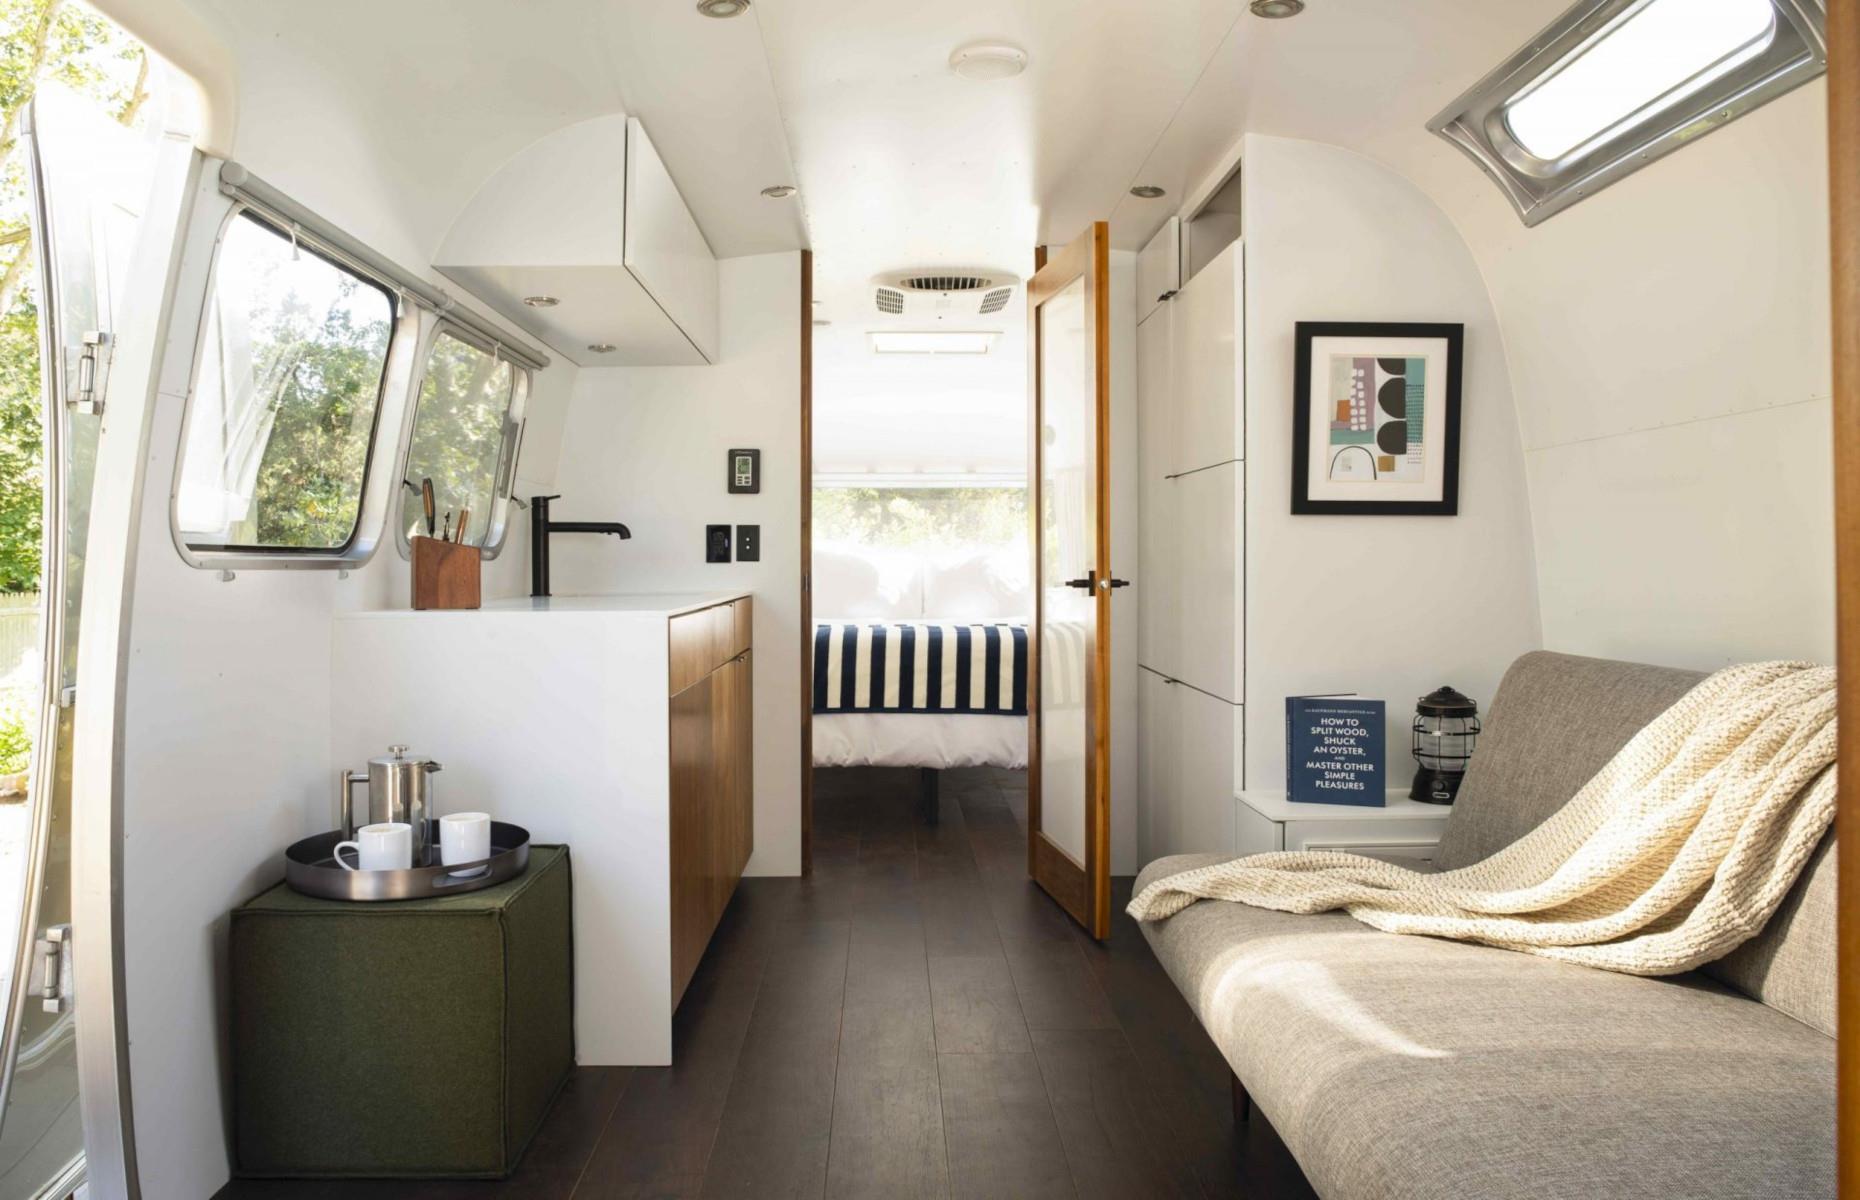 <p>The spacious 31-foot Airstream can sleep up to three adults, or two adults and two children. The interior is bright and airy, with a neutral white color scheme and pared-back furnishings. Outside, the outdoor patio includes a firepit and a dining area. </p>